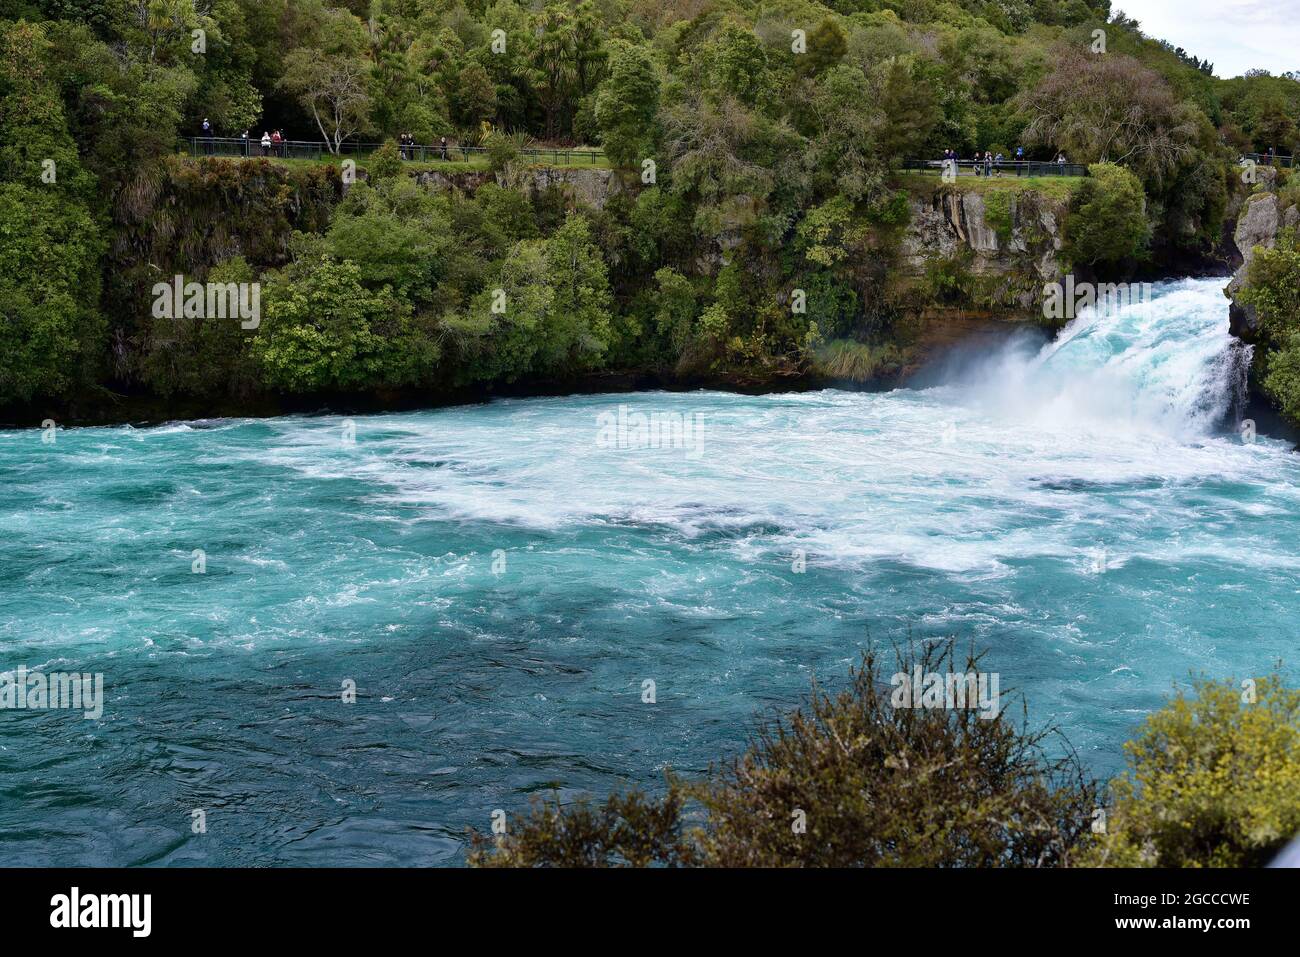 Huka Falls, a tourist attraction near the town of Taupo, New Zealand Stock Photo